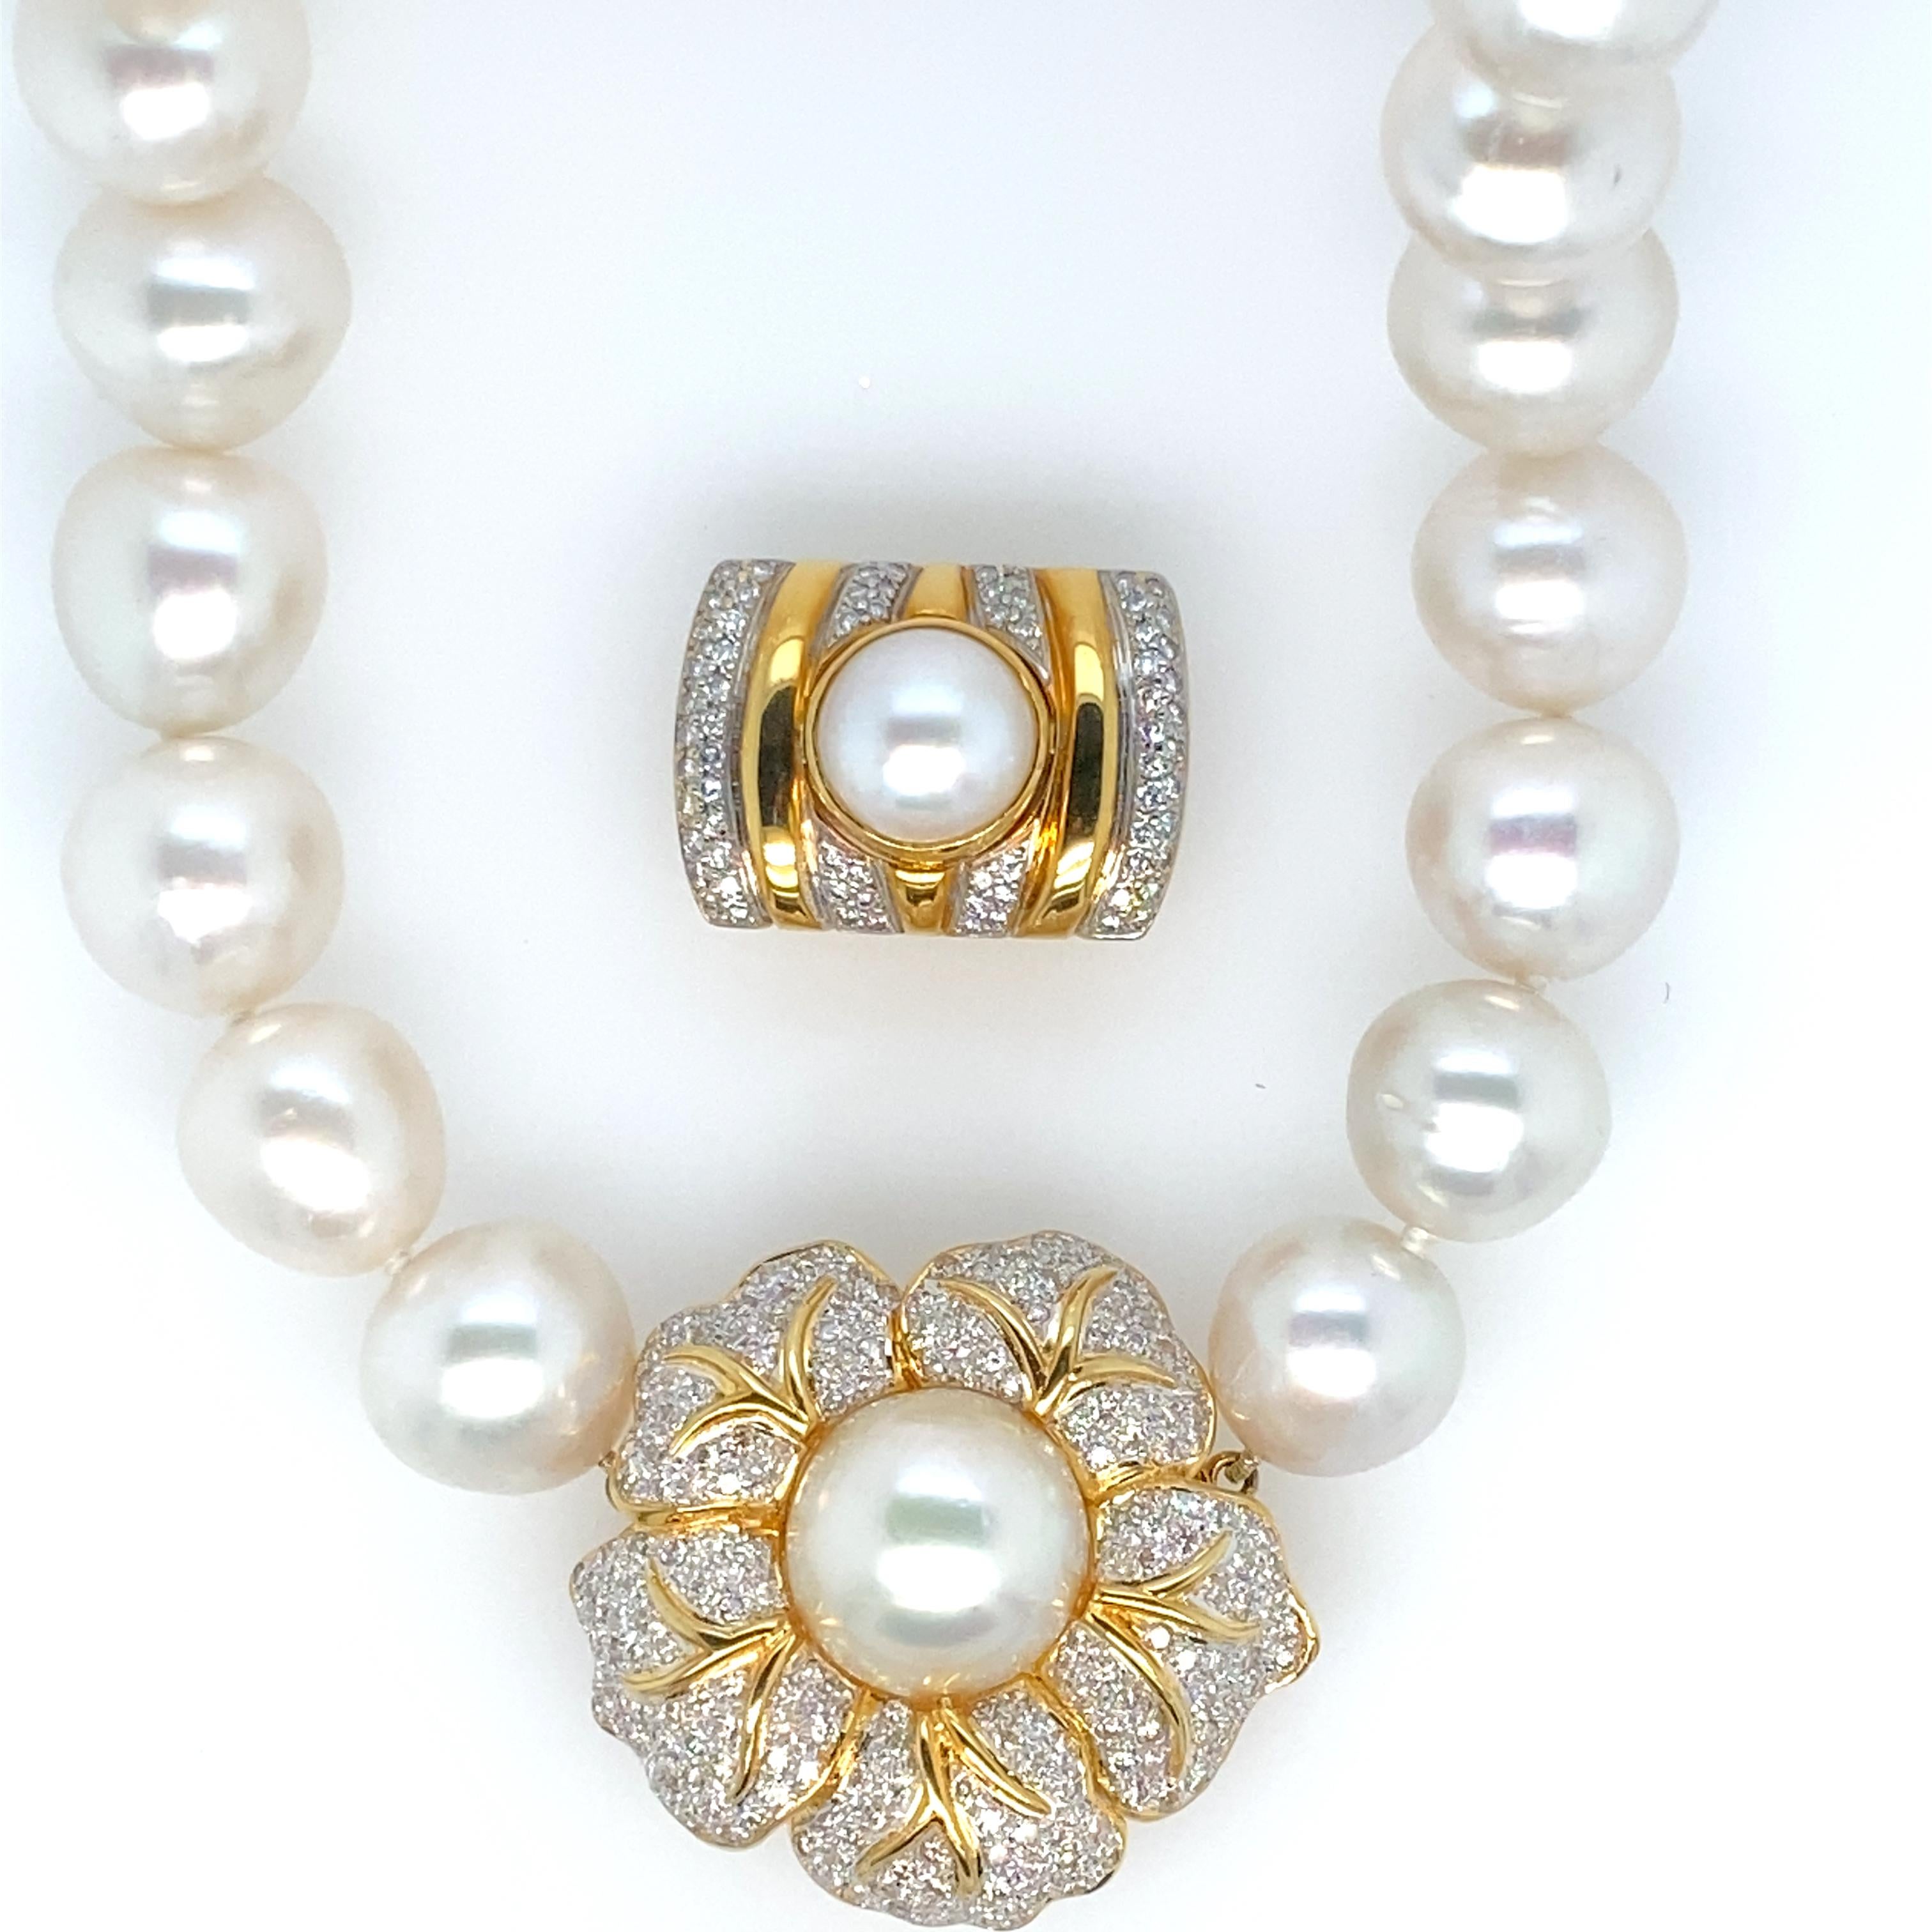 Extra large South Sea pearls make this stunning necklace unique!  The pearls vary in size from 14.5 mm to 18.35mm.  They are white in color, and have a very high lustre.  The unique clasp detaches so another one, shown in the picture, can be added. 